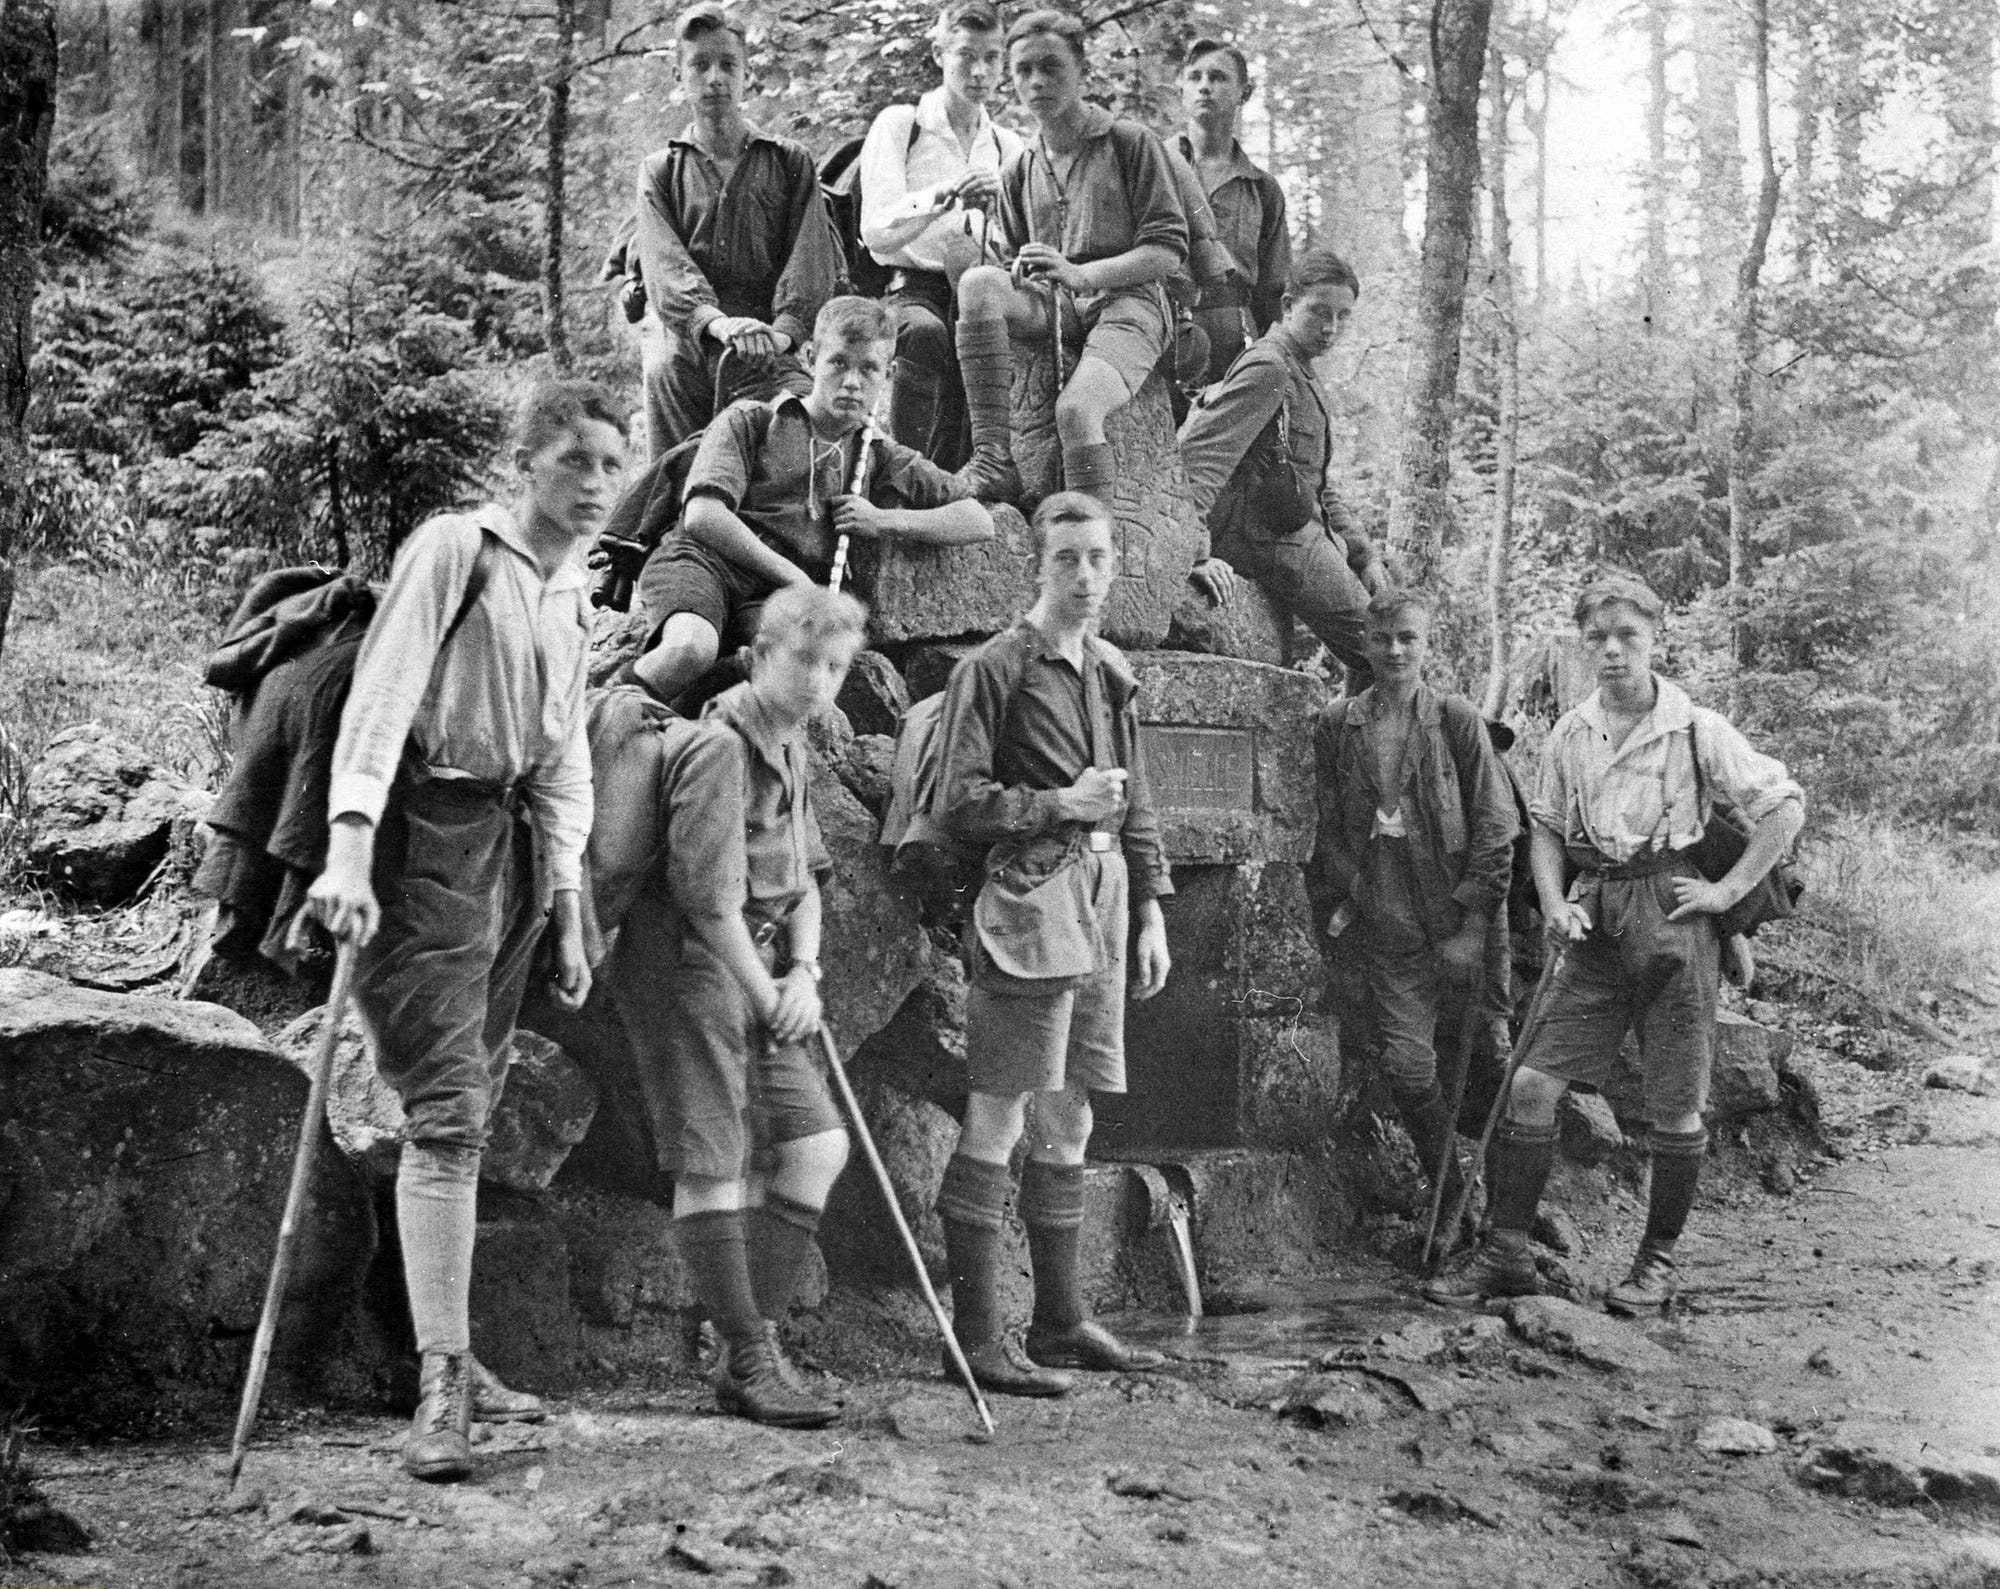 The Nazis Outlawed Hiking Then They Turned It Into A Hitler Youth Travesty